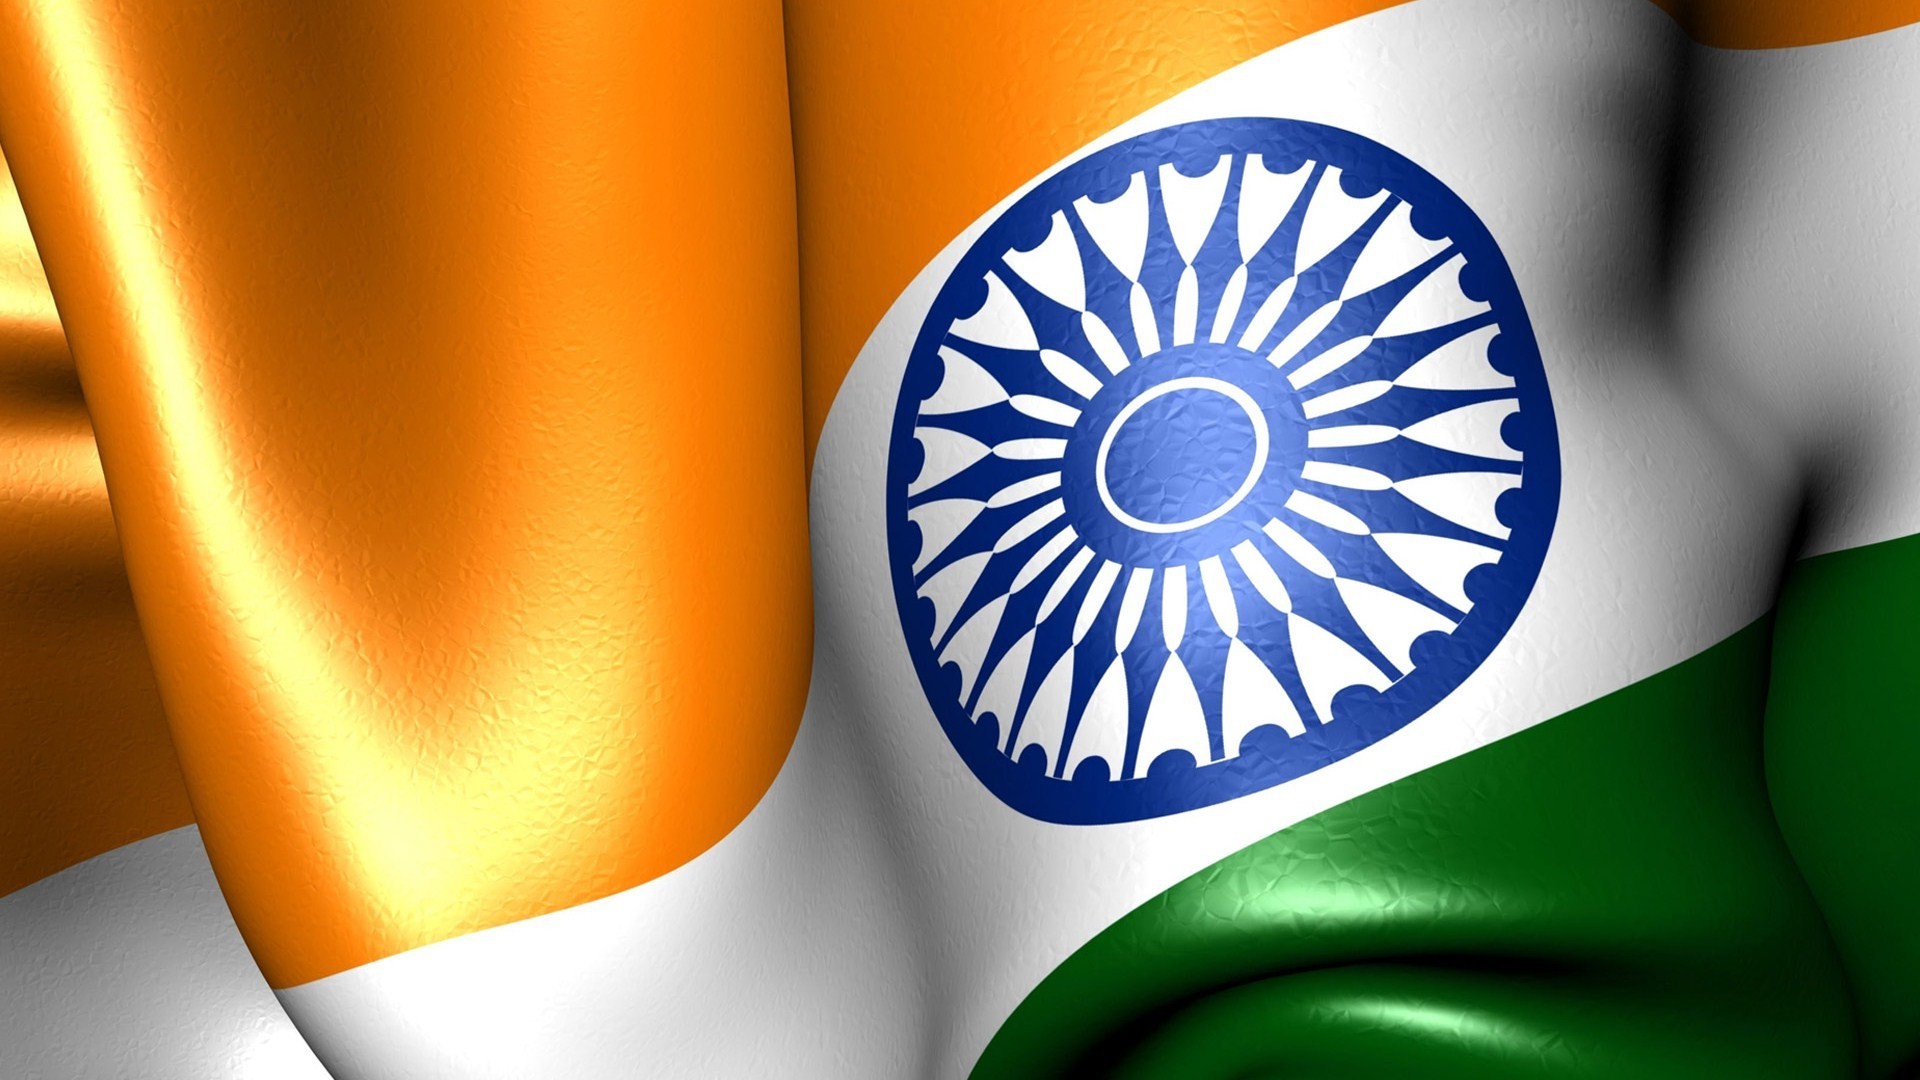 1920x1080 Best 20+ Indian flag images download ideas on Pinterest | Indian flag  download, Flag india and Indian flag history